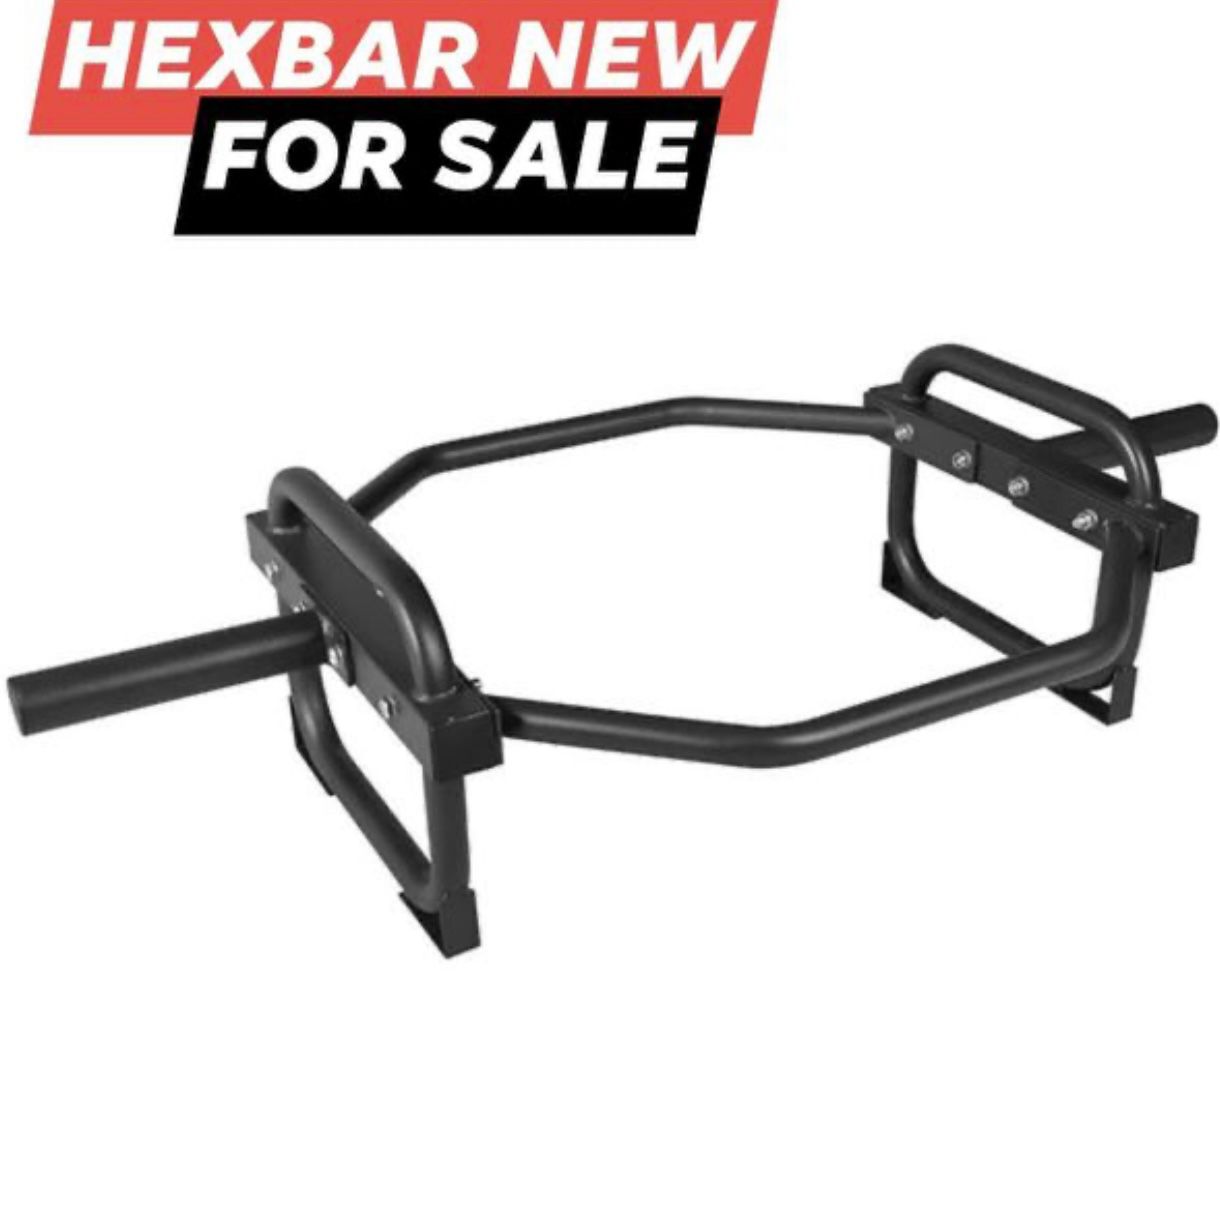 OLYMPIC 2" HEX BARBELL